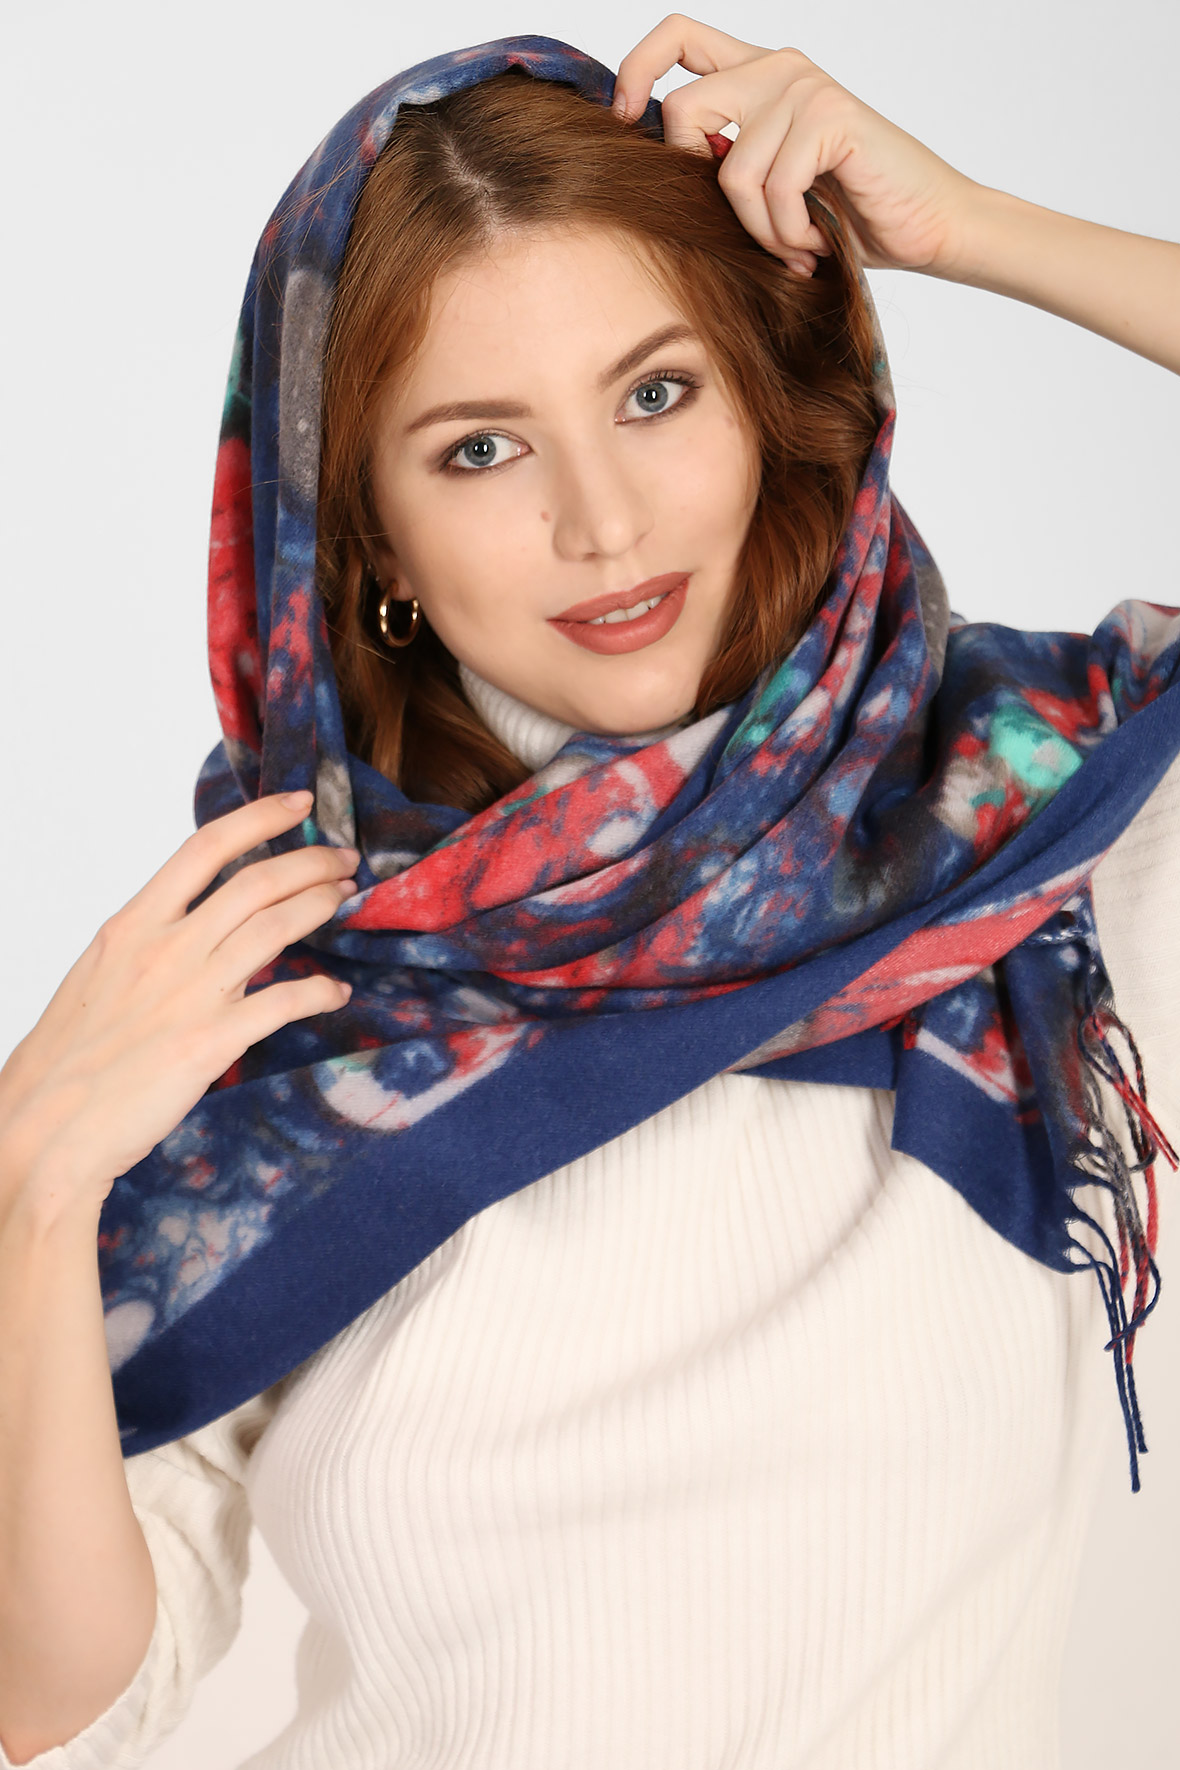 How Wholesale Scarves makes fast and easy earns – Effective tips here!